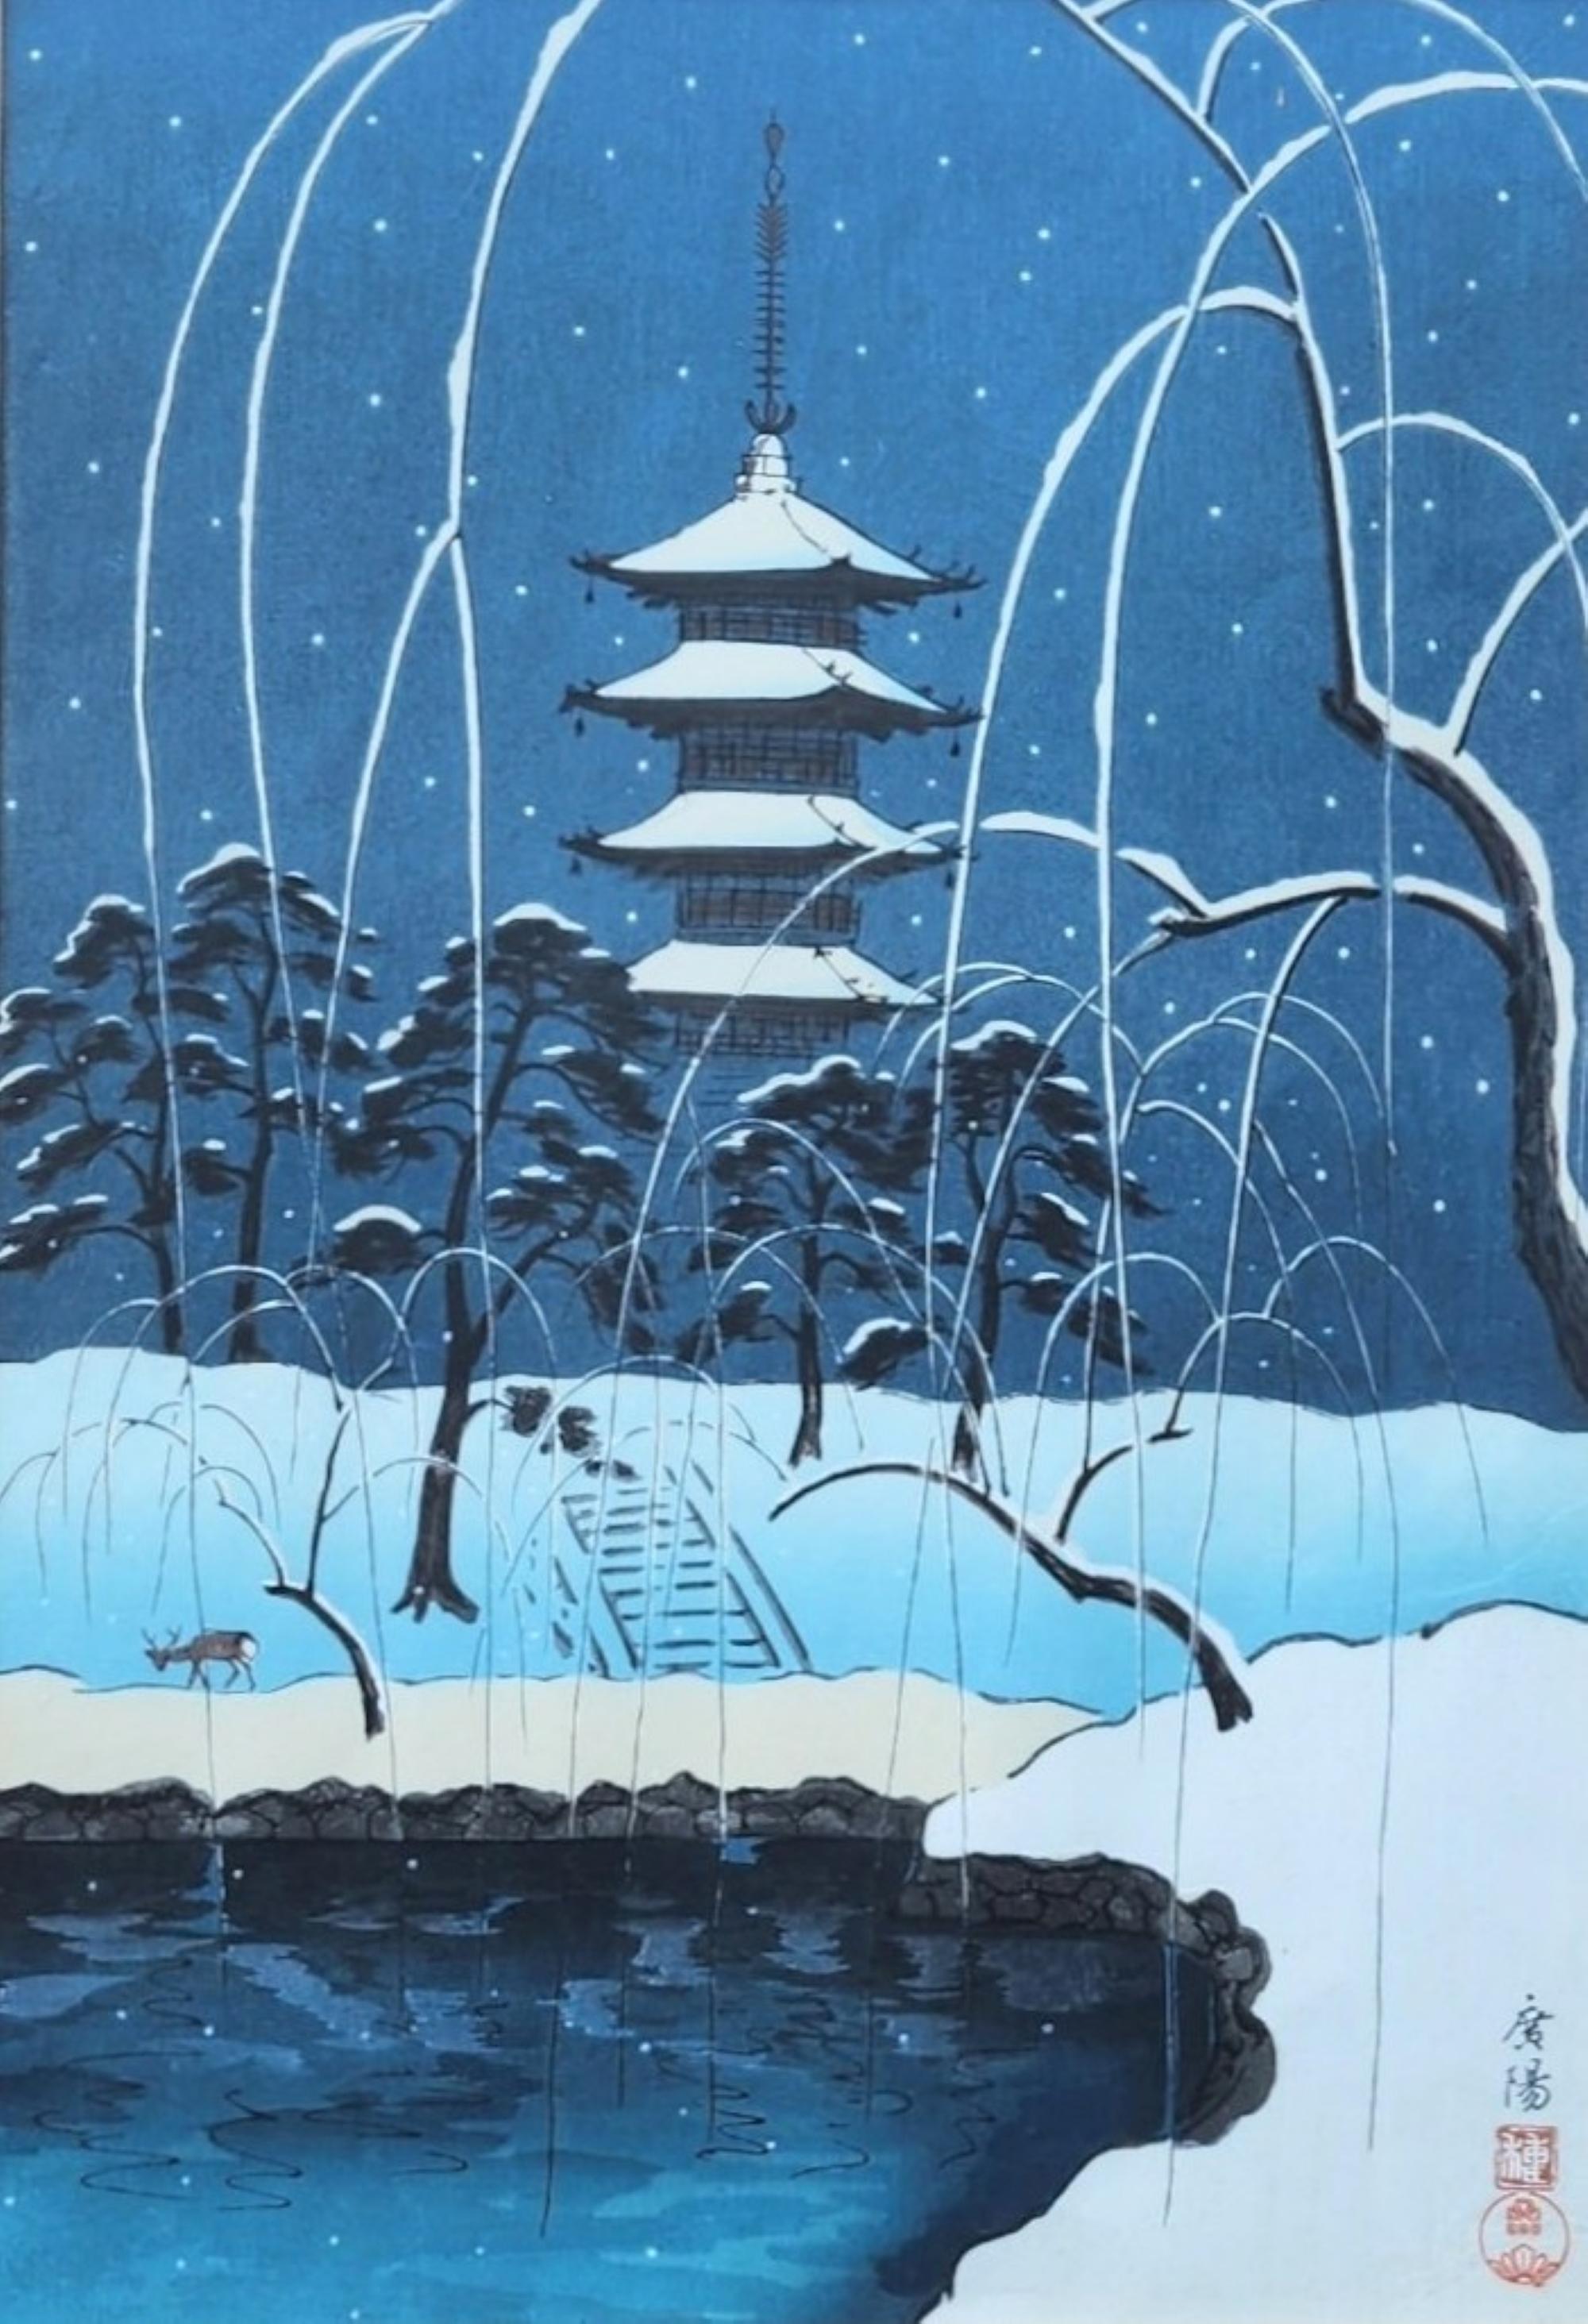 Koyo Omura (Japanese, 1891 - 1983)

Signed: Lower, Right

Pagoda at Nara in Winter, c. 1940s - 1950s

Woodblock Print

Site Size: 15" x 10 3/8"

Housed in a 1" Frame with Anti-Glare glass

Overall Size: 25 3/4" x 19 3/4"

A nice presentation in very